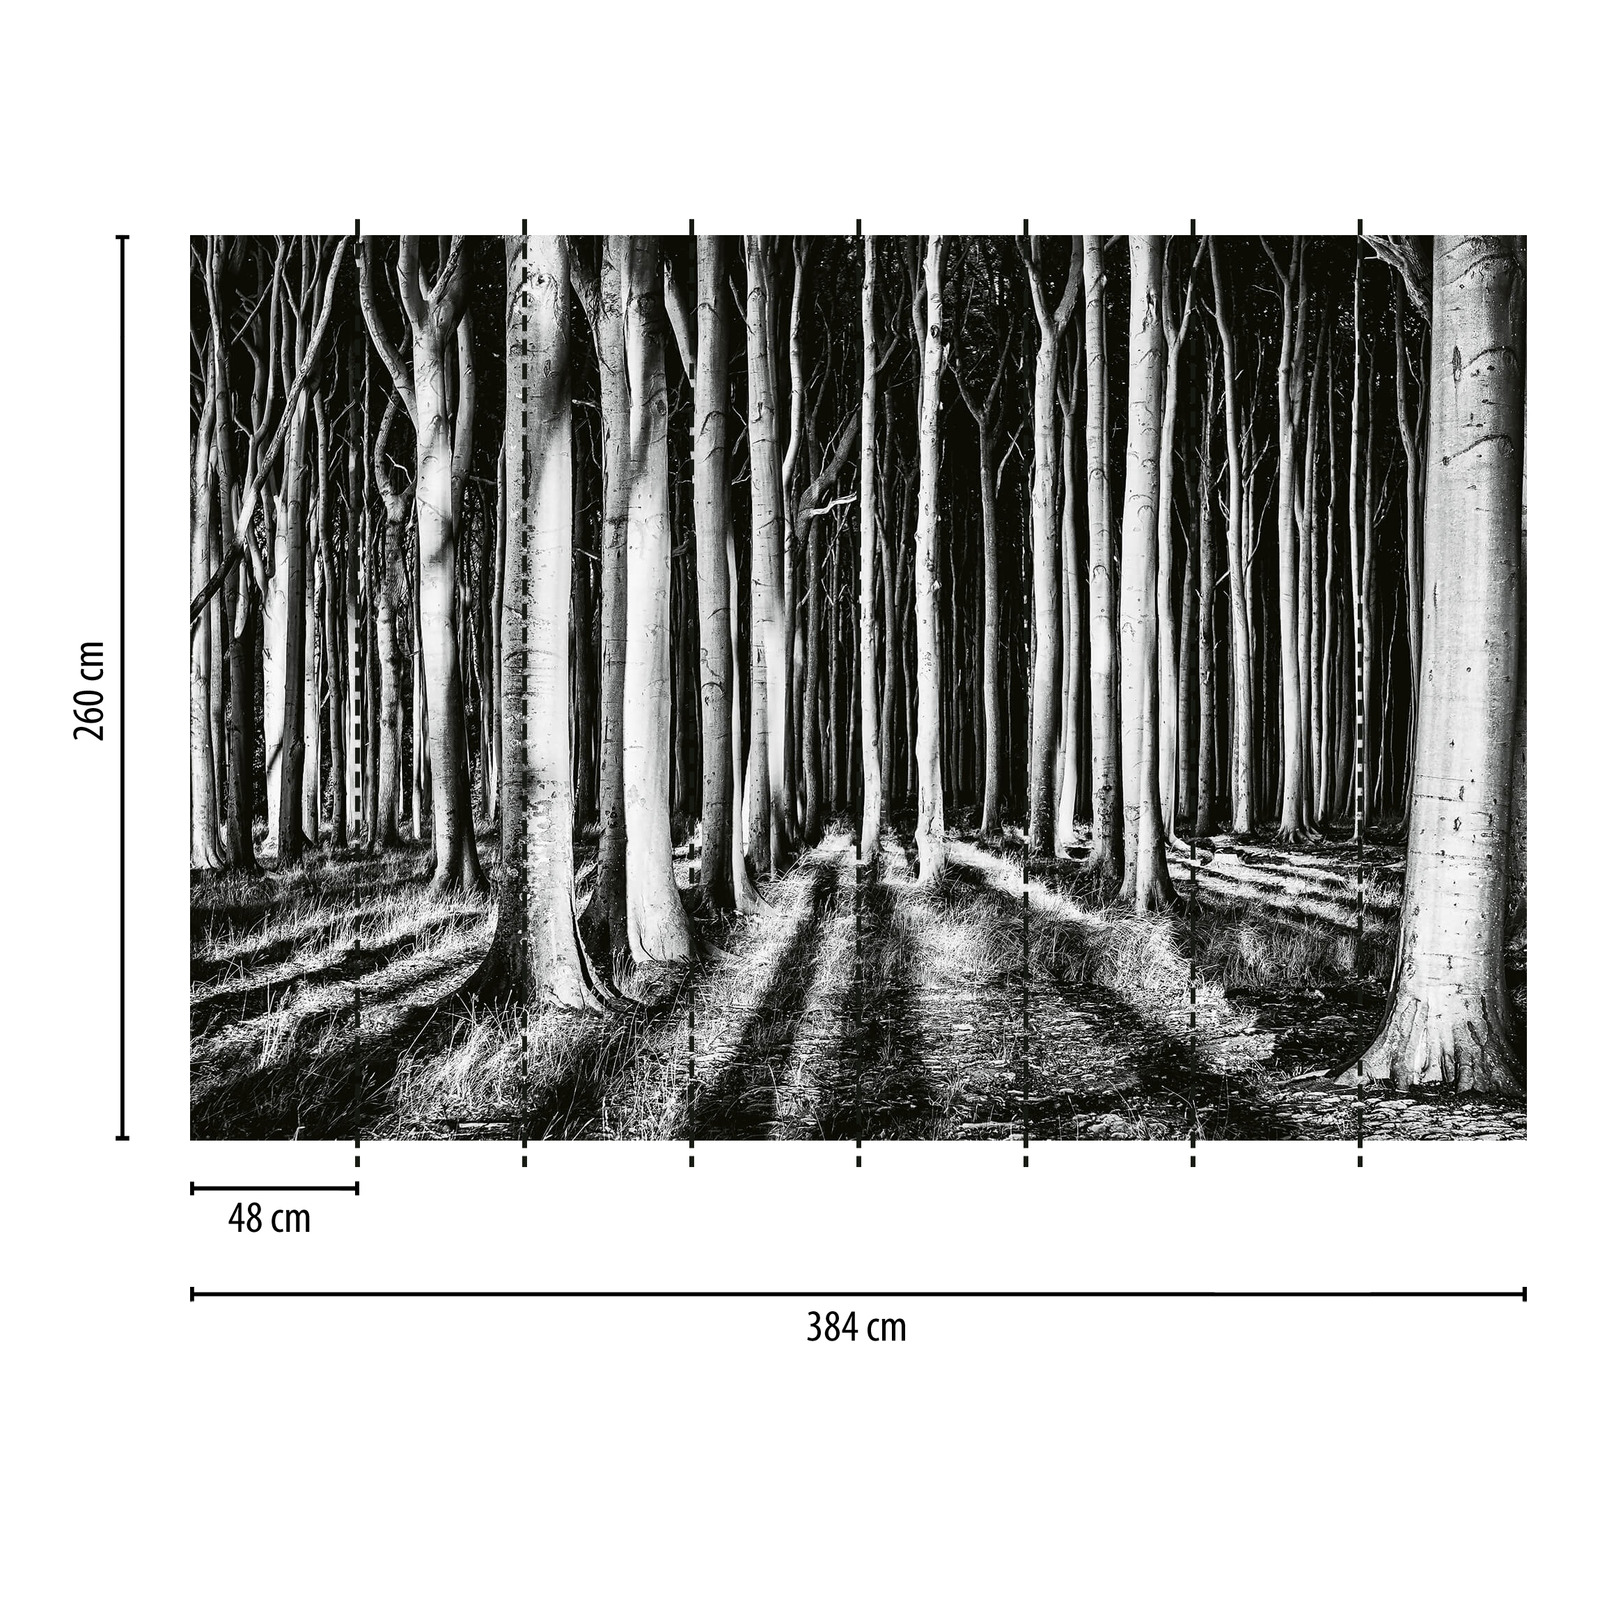             Photo wallpaper nature ghost forest - black, white, grey
        